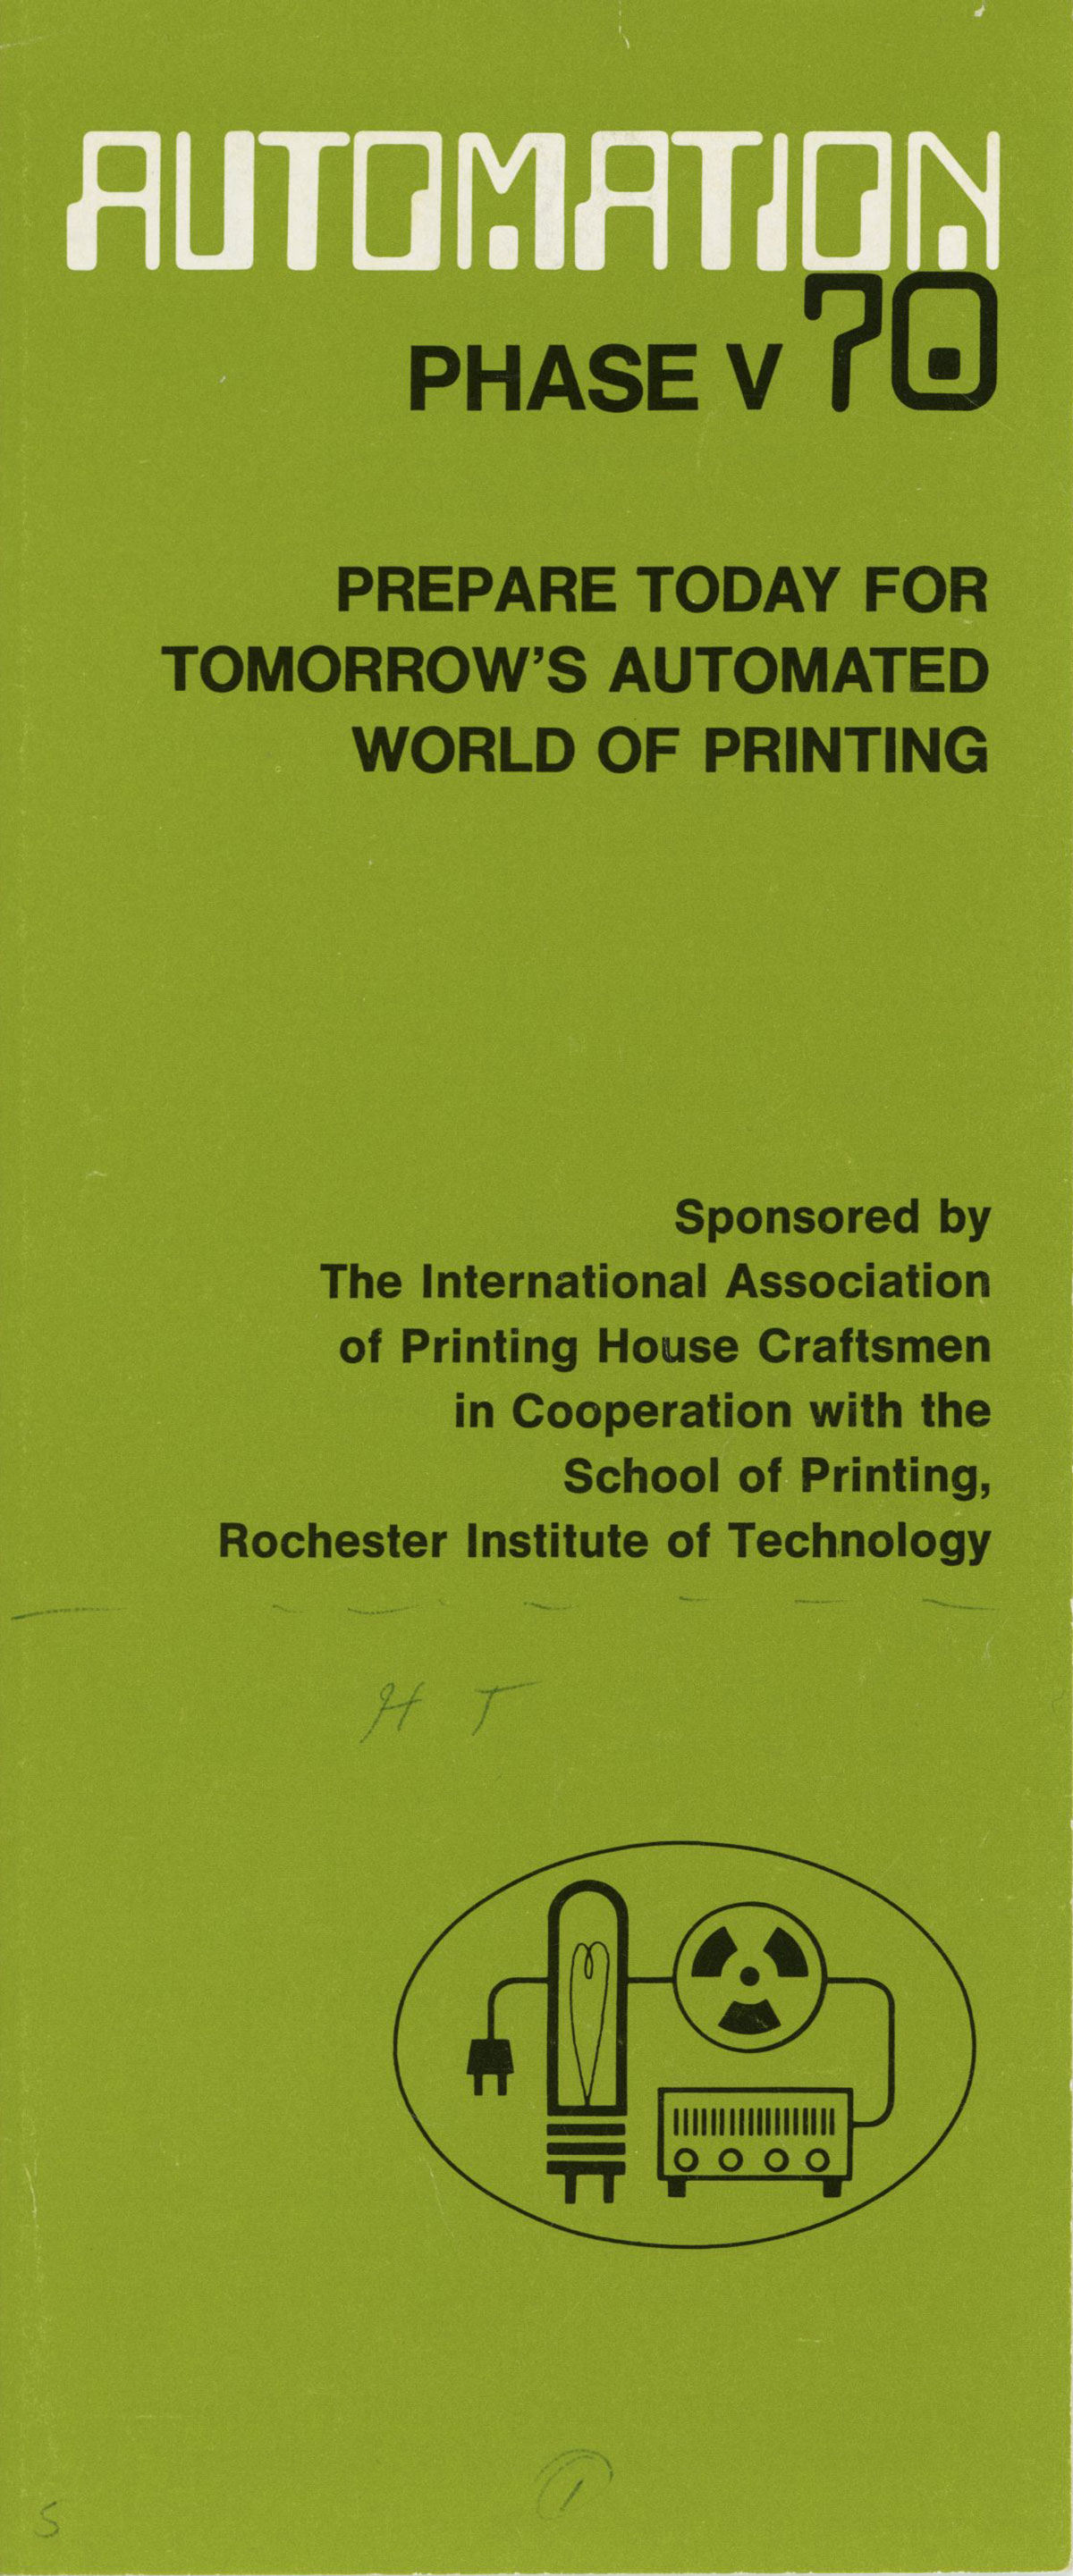 Automation Phase V 70 Prepare today for tomorrow's automated world of printing Sponsored by The International Association of Printing House Craftsmen in Cooperation with the School of Printing, Rochester Institute of Technology